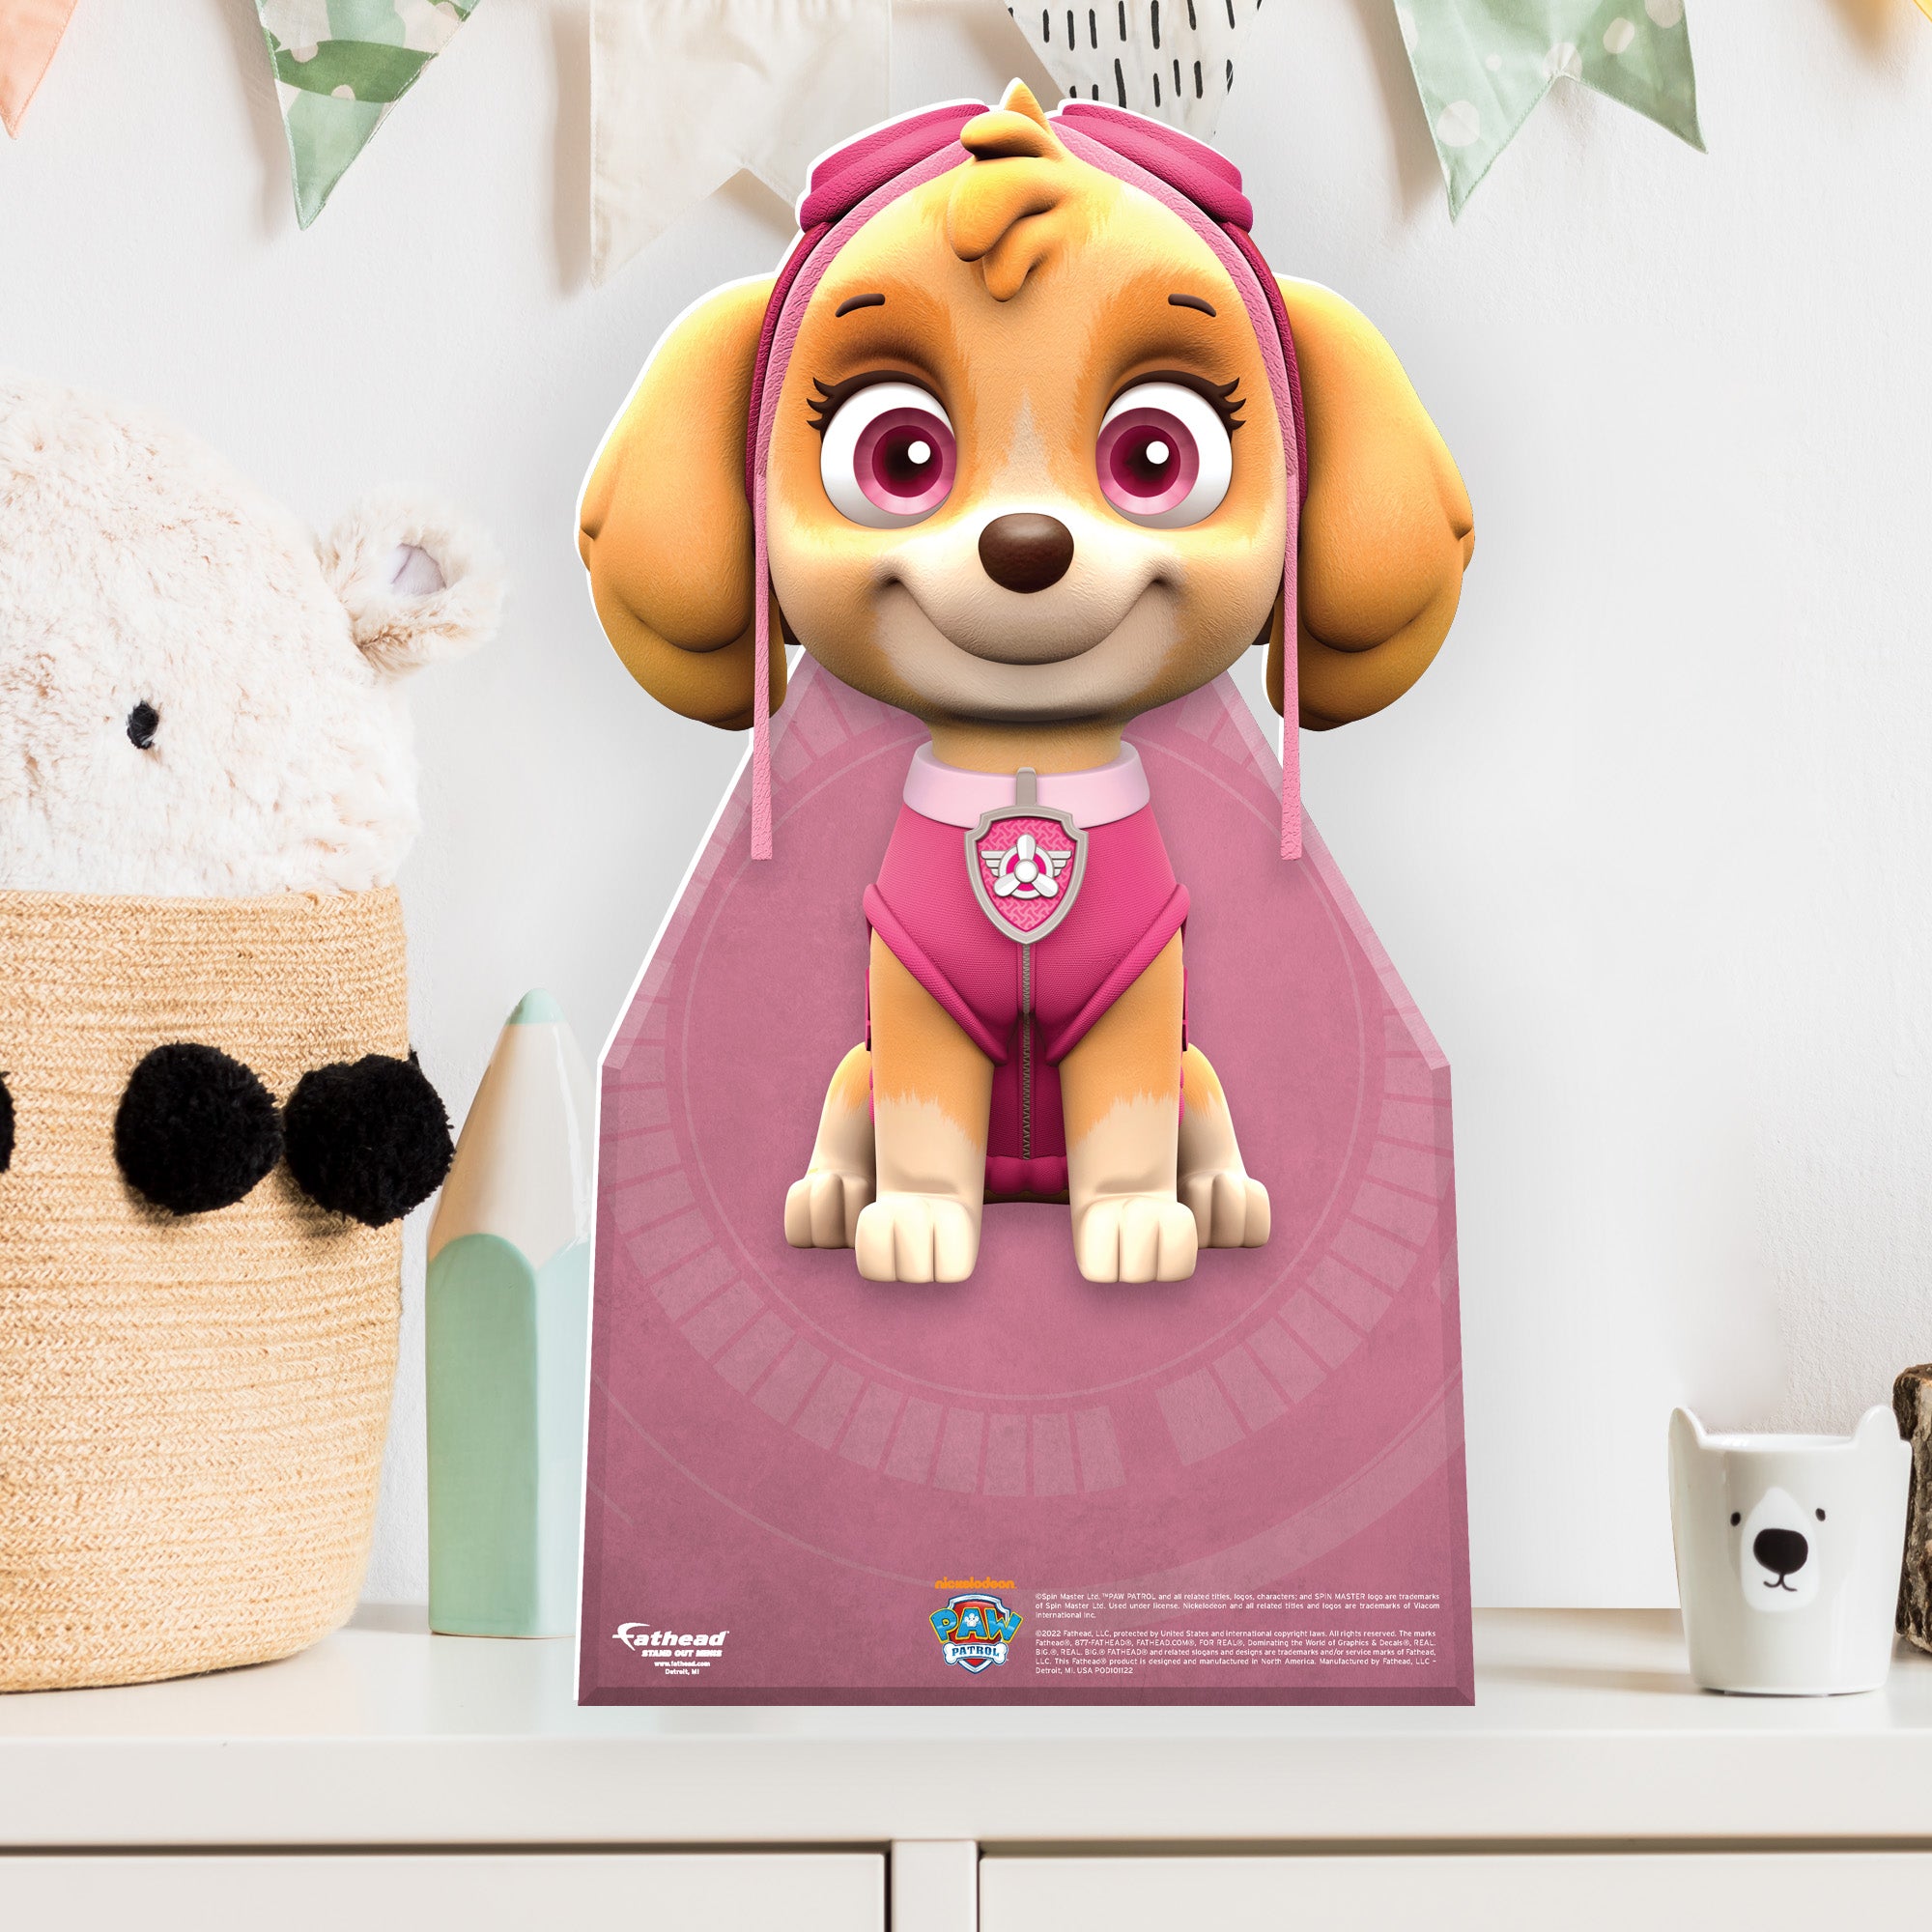 Paw Patrol: Skye St – Licensed Cardstock Nickelodeon Cutout Officially - Fathead